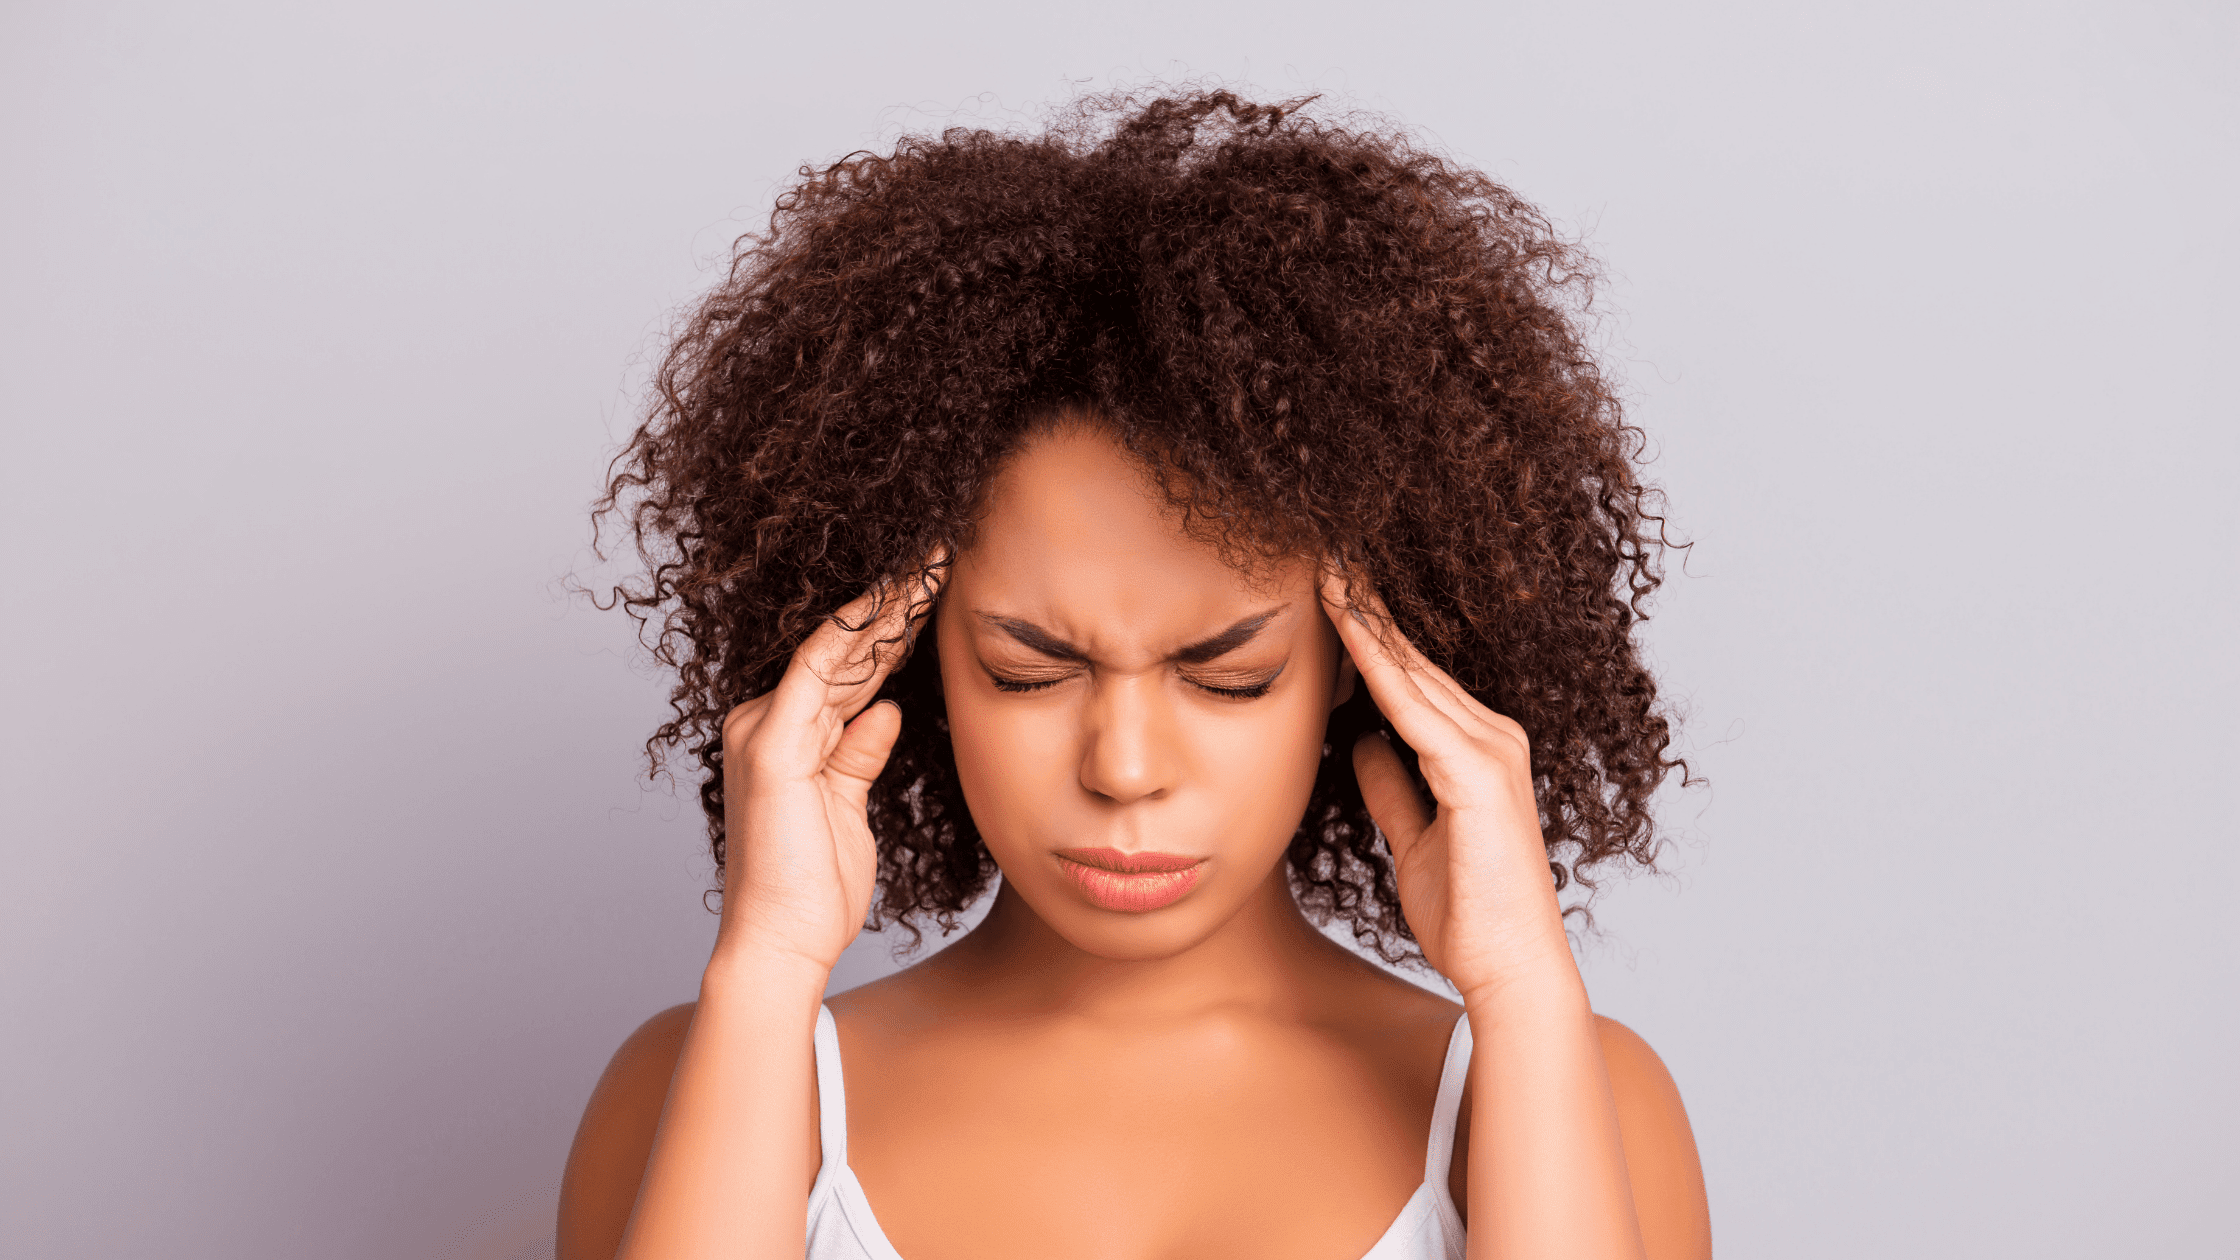 black woman holding head hoping cannabis will help her migraine